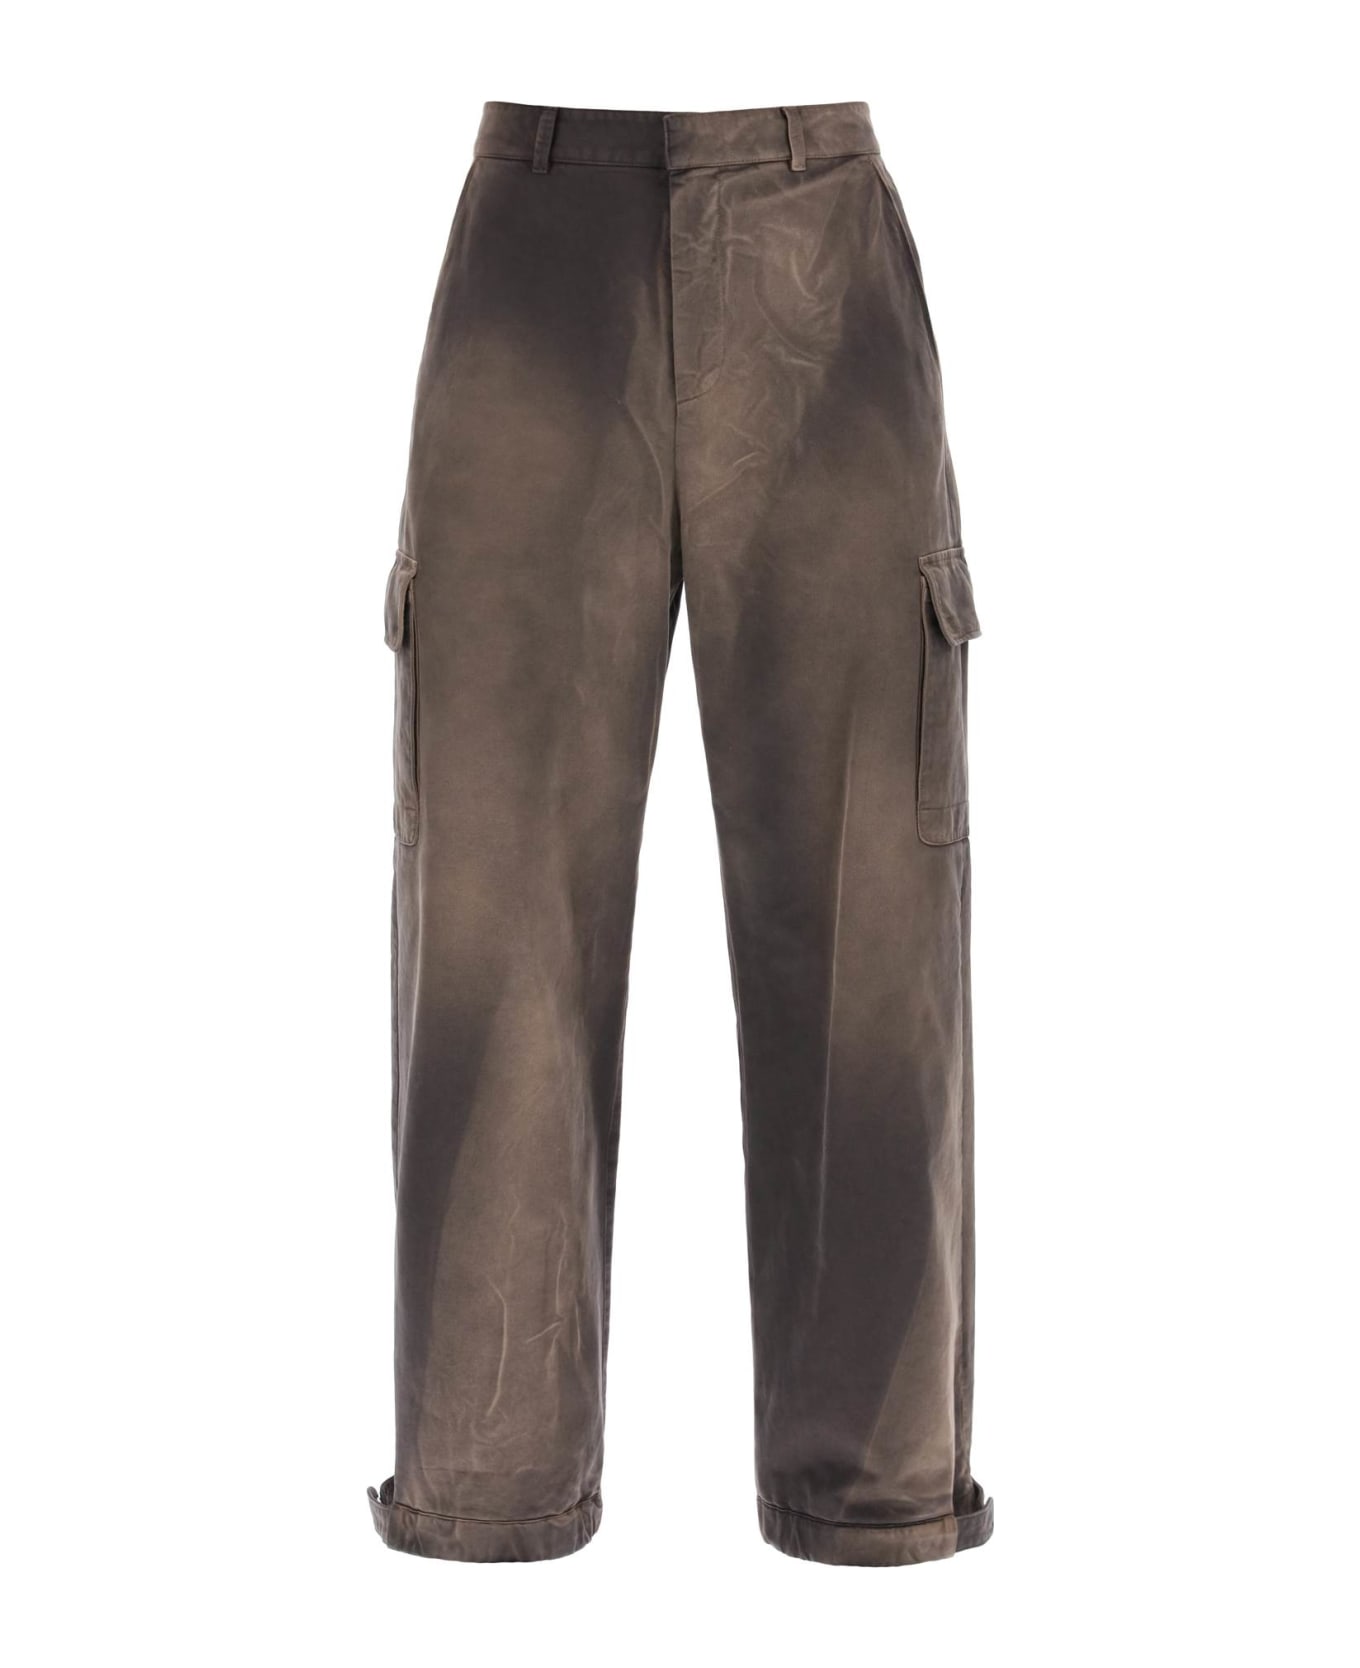 Off-White Cargo Pants - ANTHRACITE (Brown) ボトムス